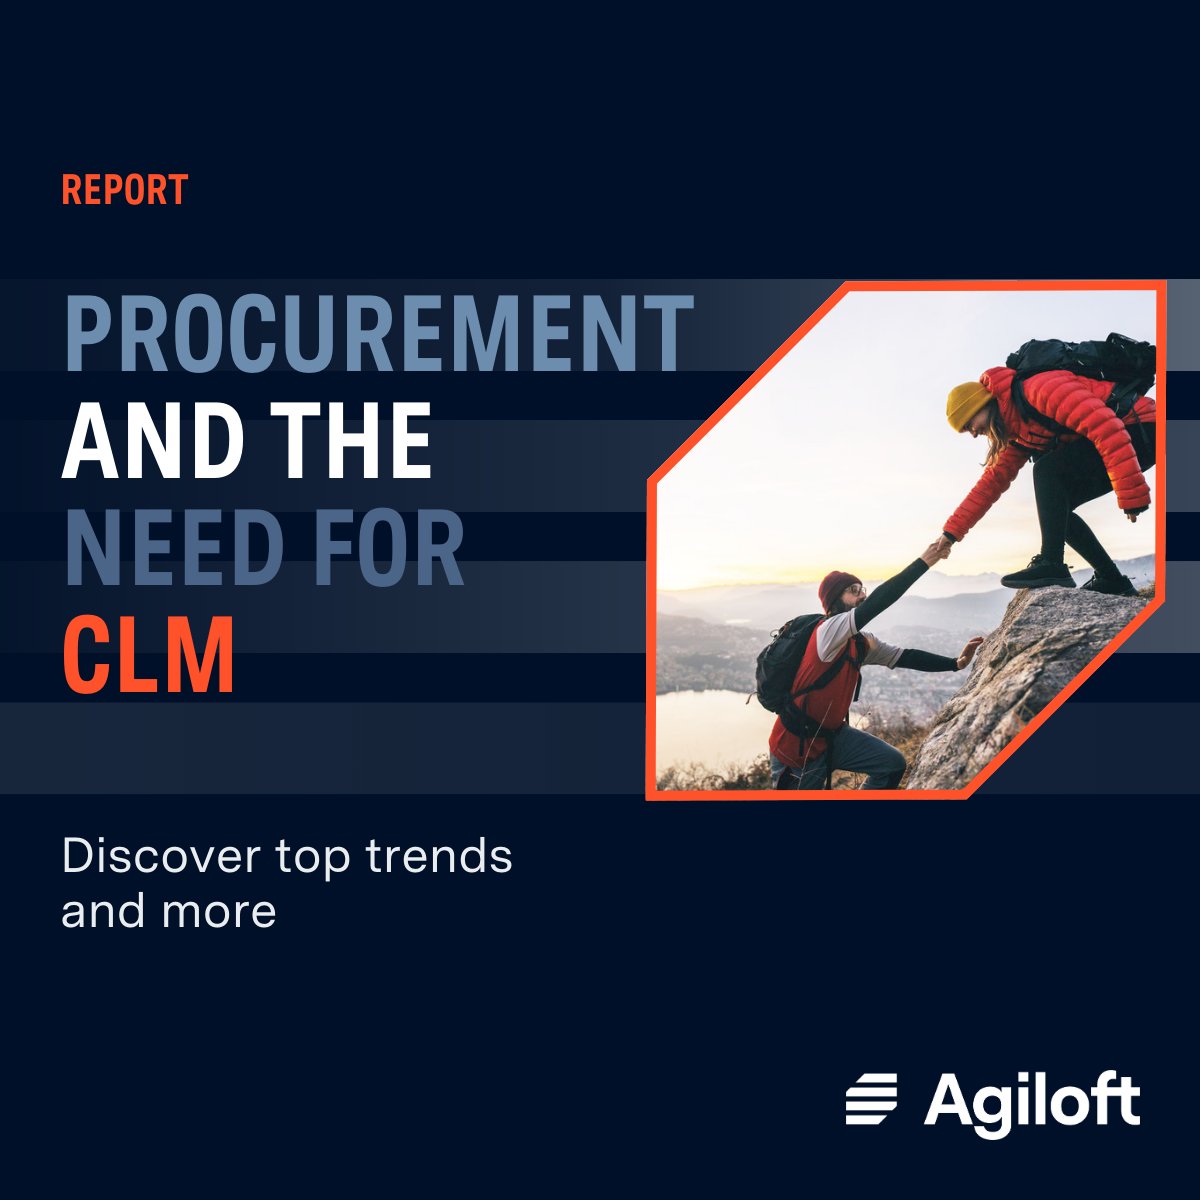 See how your experience compares to your peers in our first ever #CLM procurement survey! Agiloft surveyed #procurement professionals from around the world 🌎 and across a range of industries to learn more about their #CLM solutions. Get the report: hubs.li/Q02vdjsP0